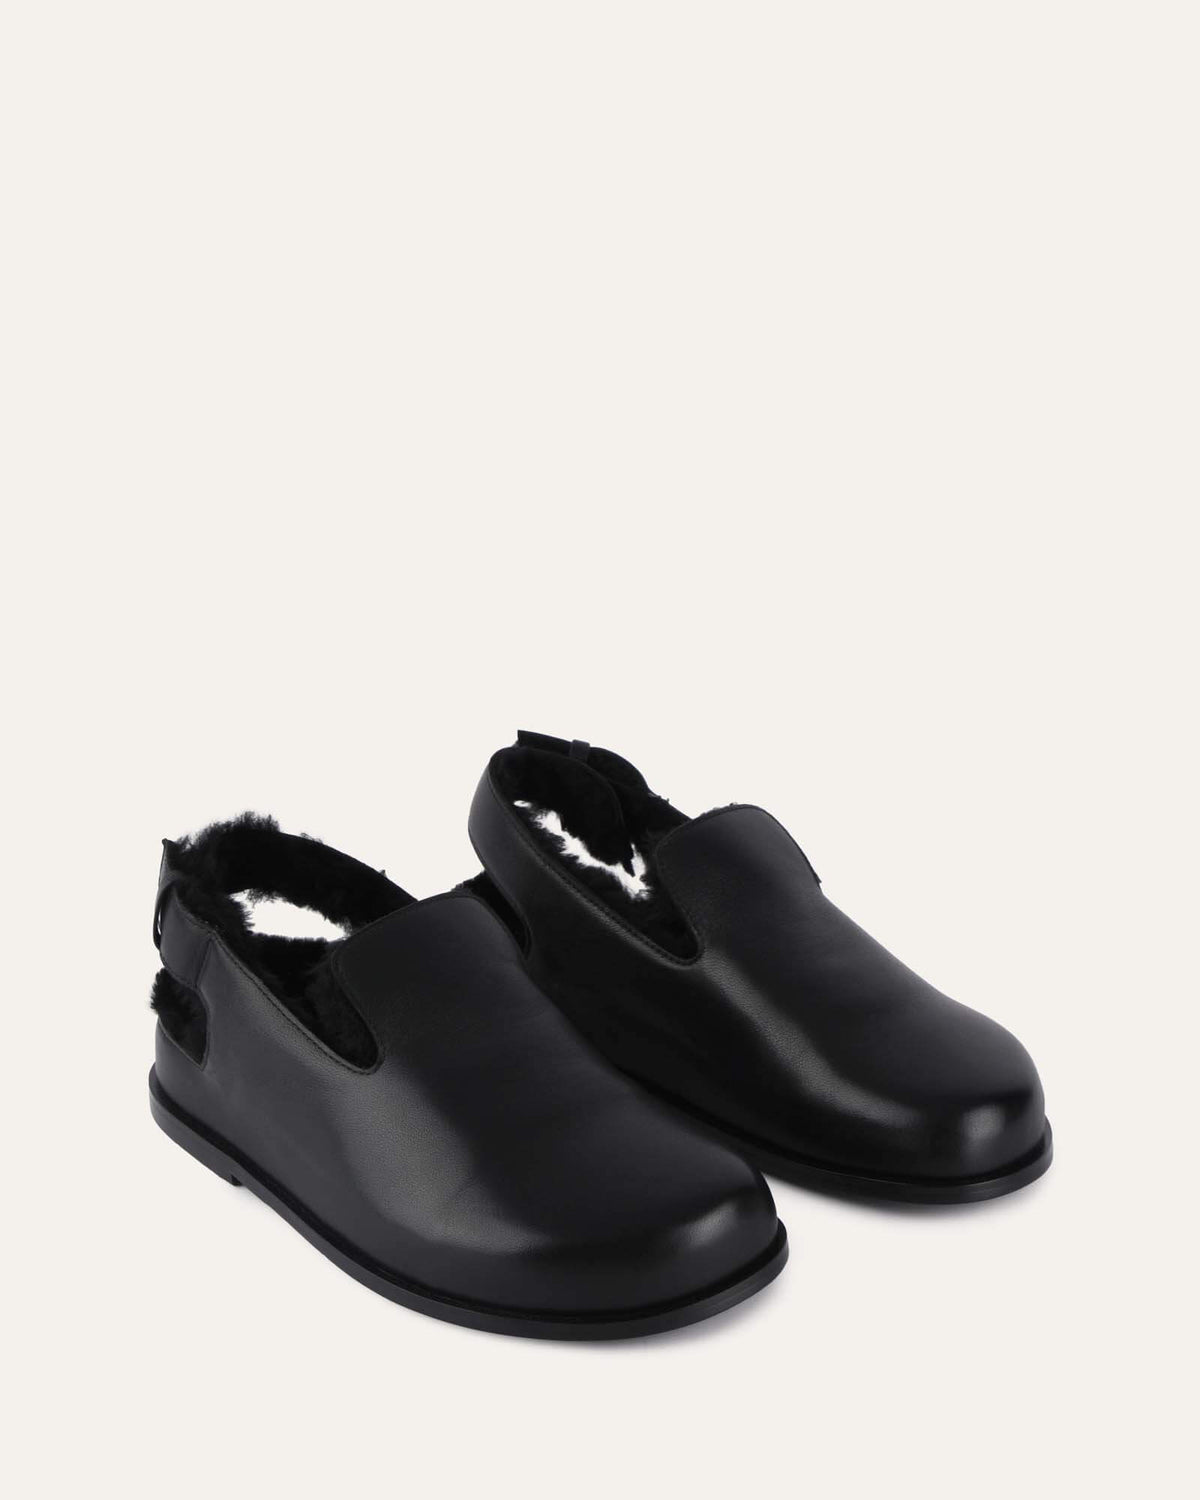 MEREDITH CASUAL FLATS BLACK LEATHER